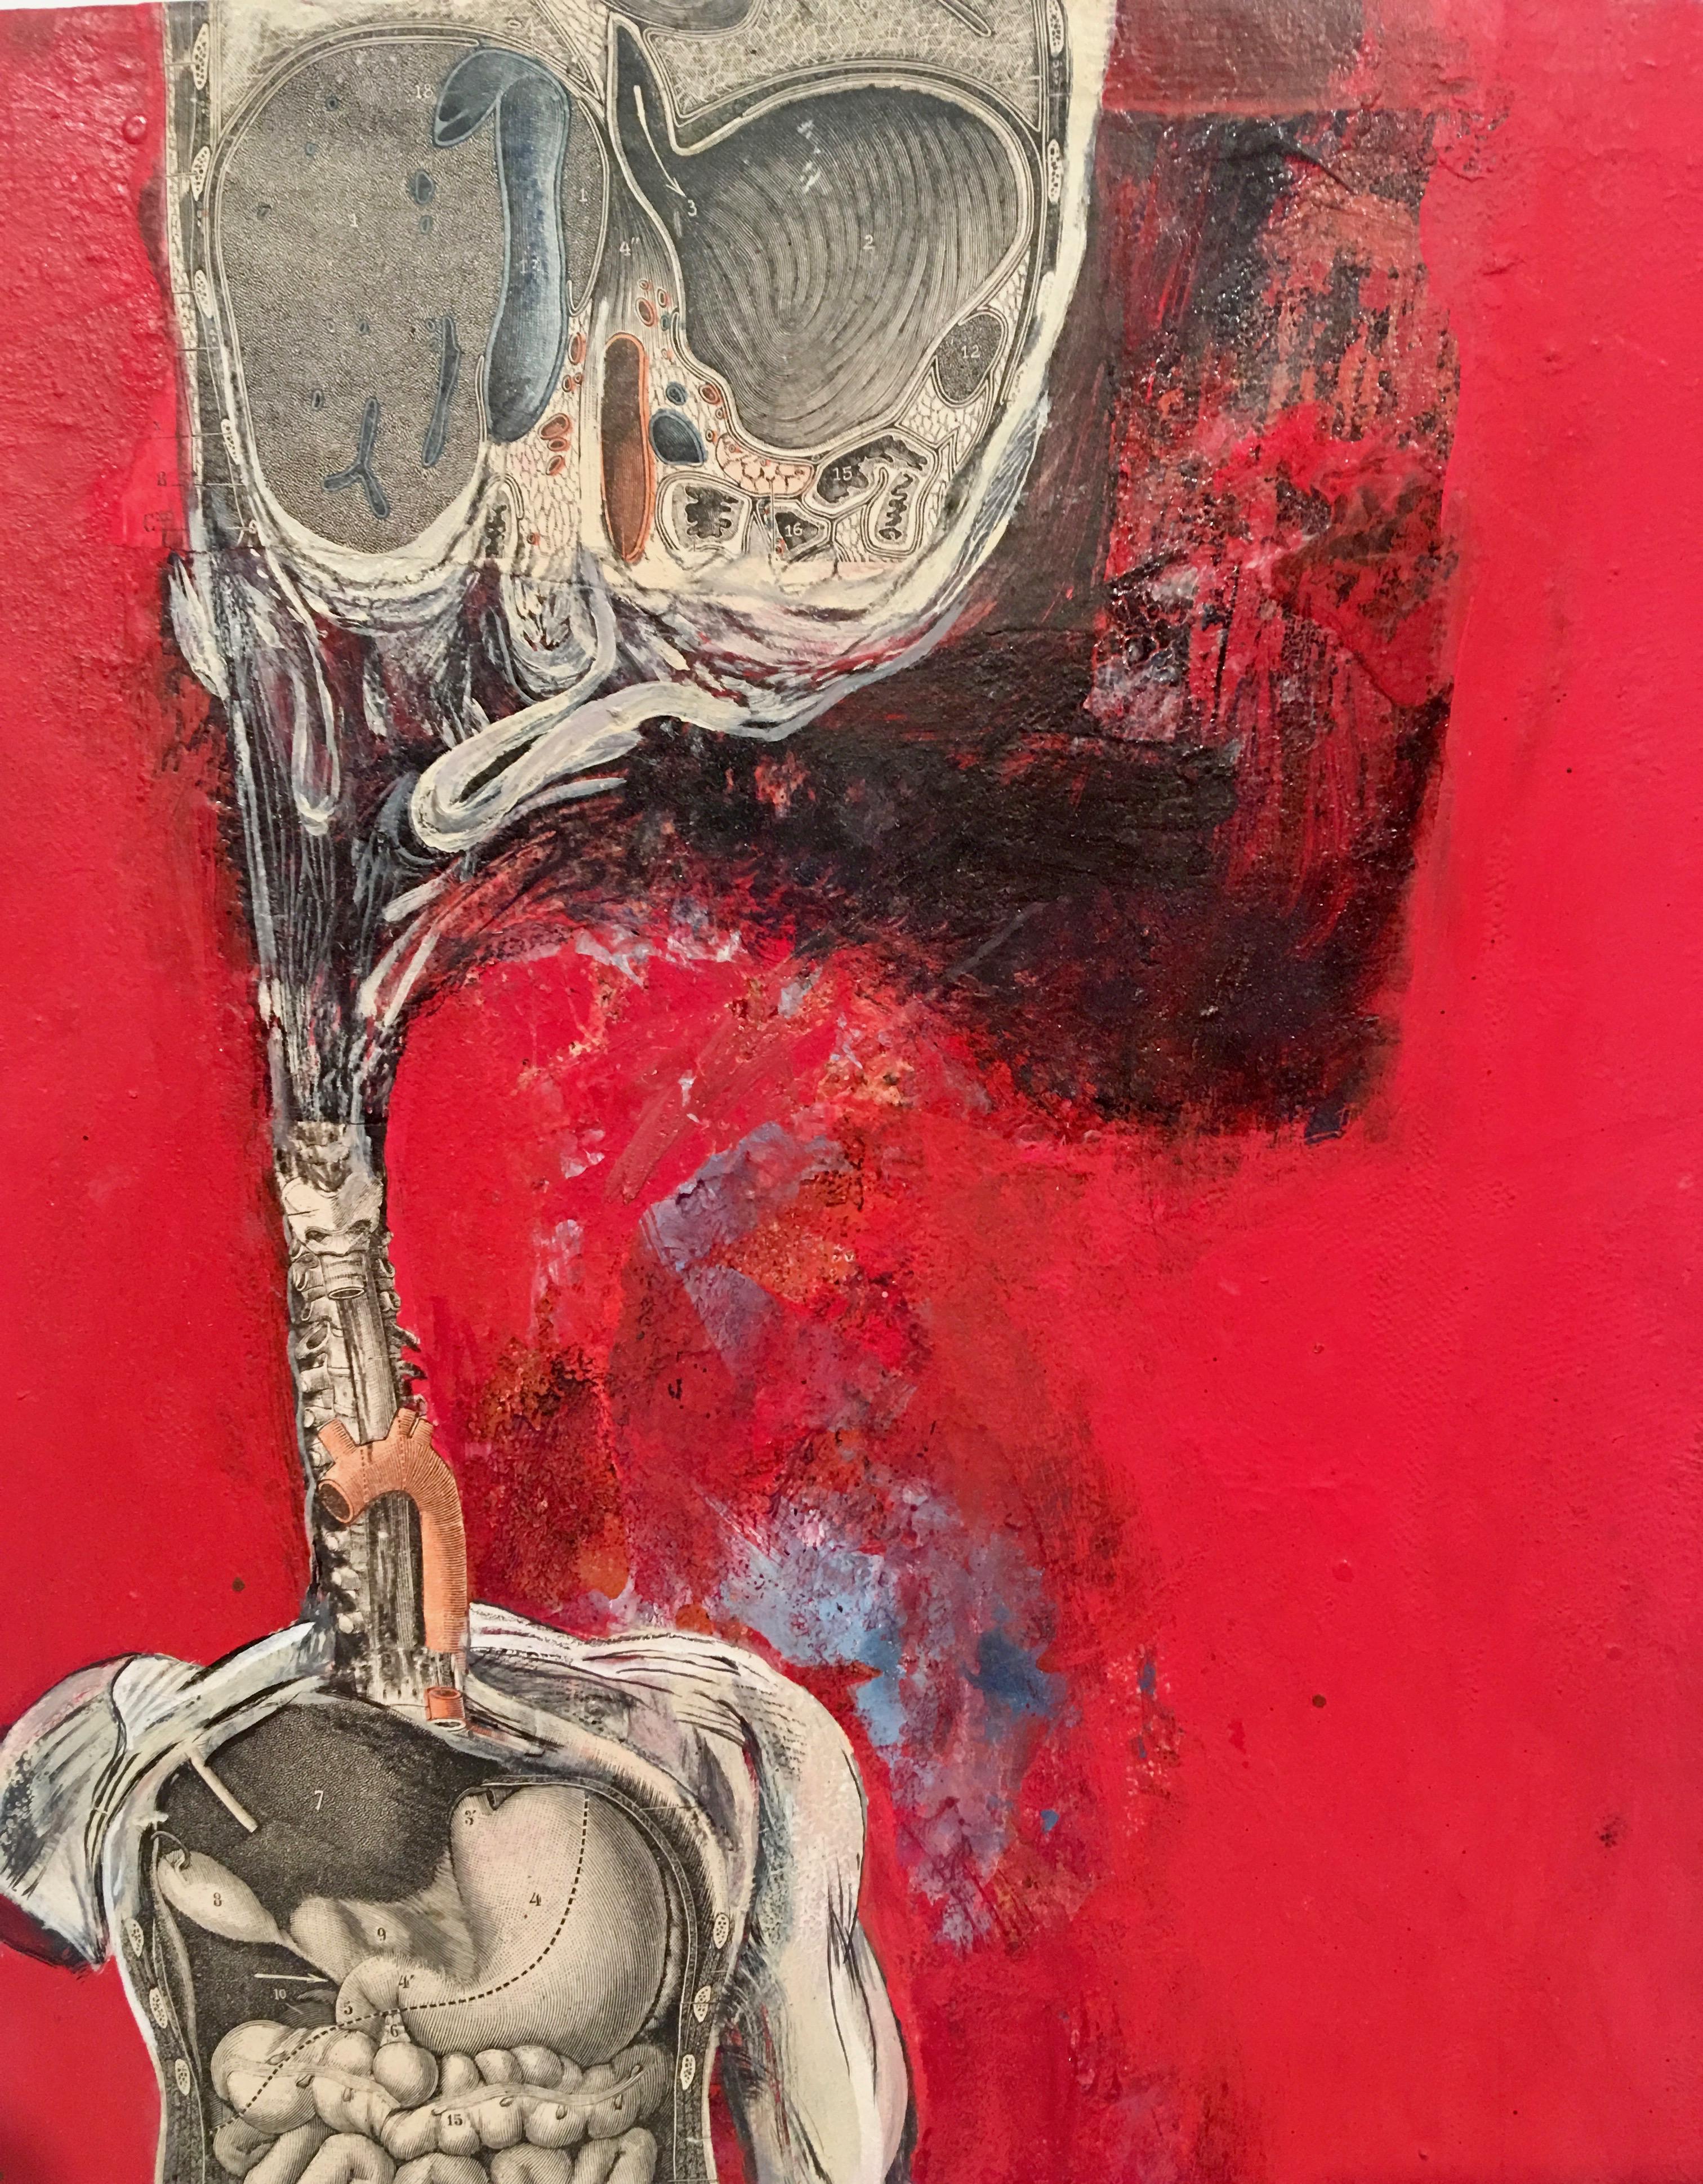 Pascal Pillard's obsession with anatomy and his desire to represent bodies viscerally from the inside out is on full display here. This is a mixed media canvas where parts of the male figure are collaged elements from anatomy textbooks. The organs